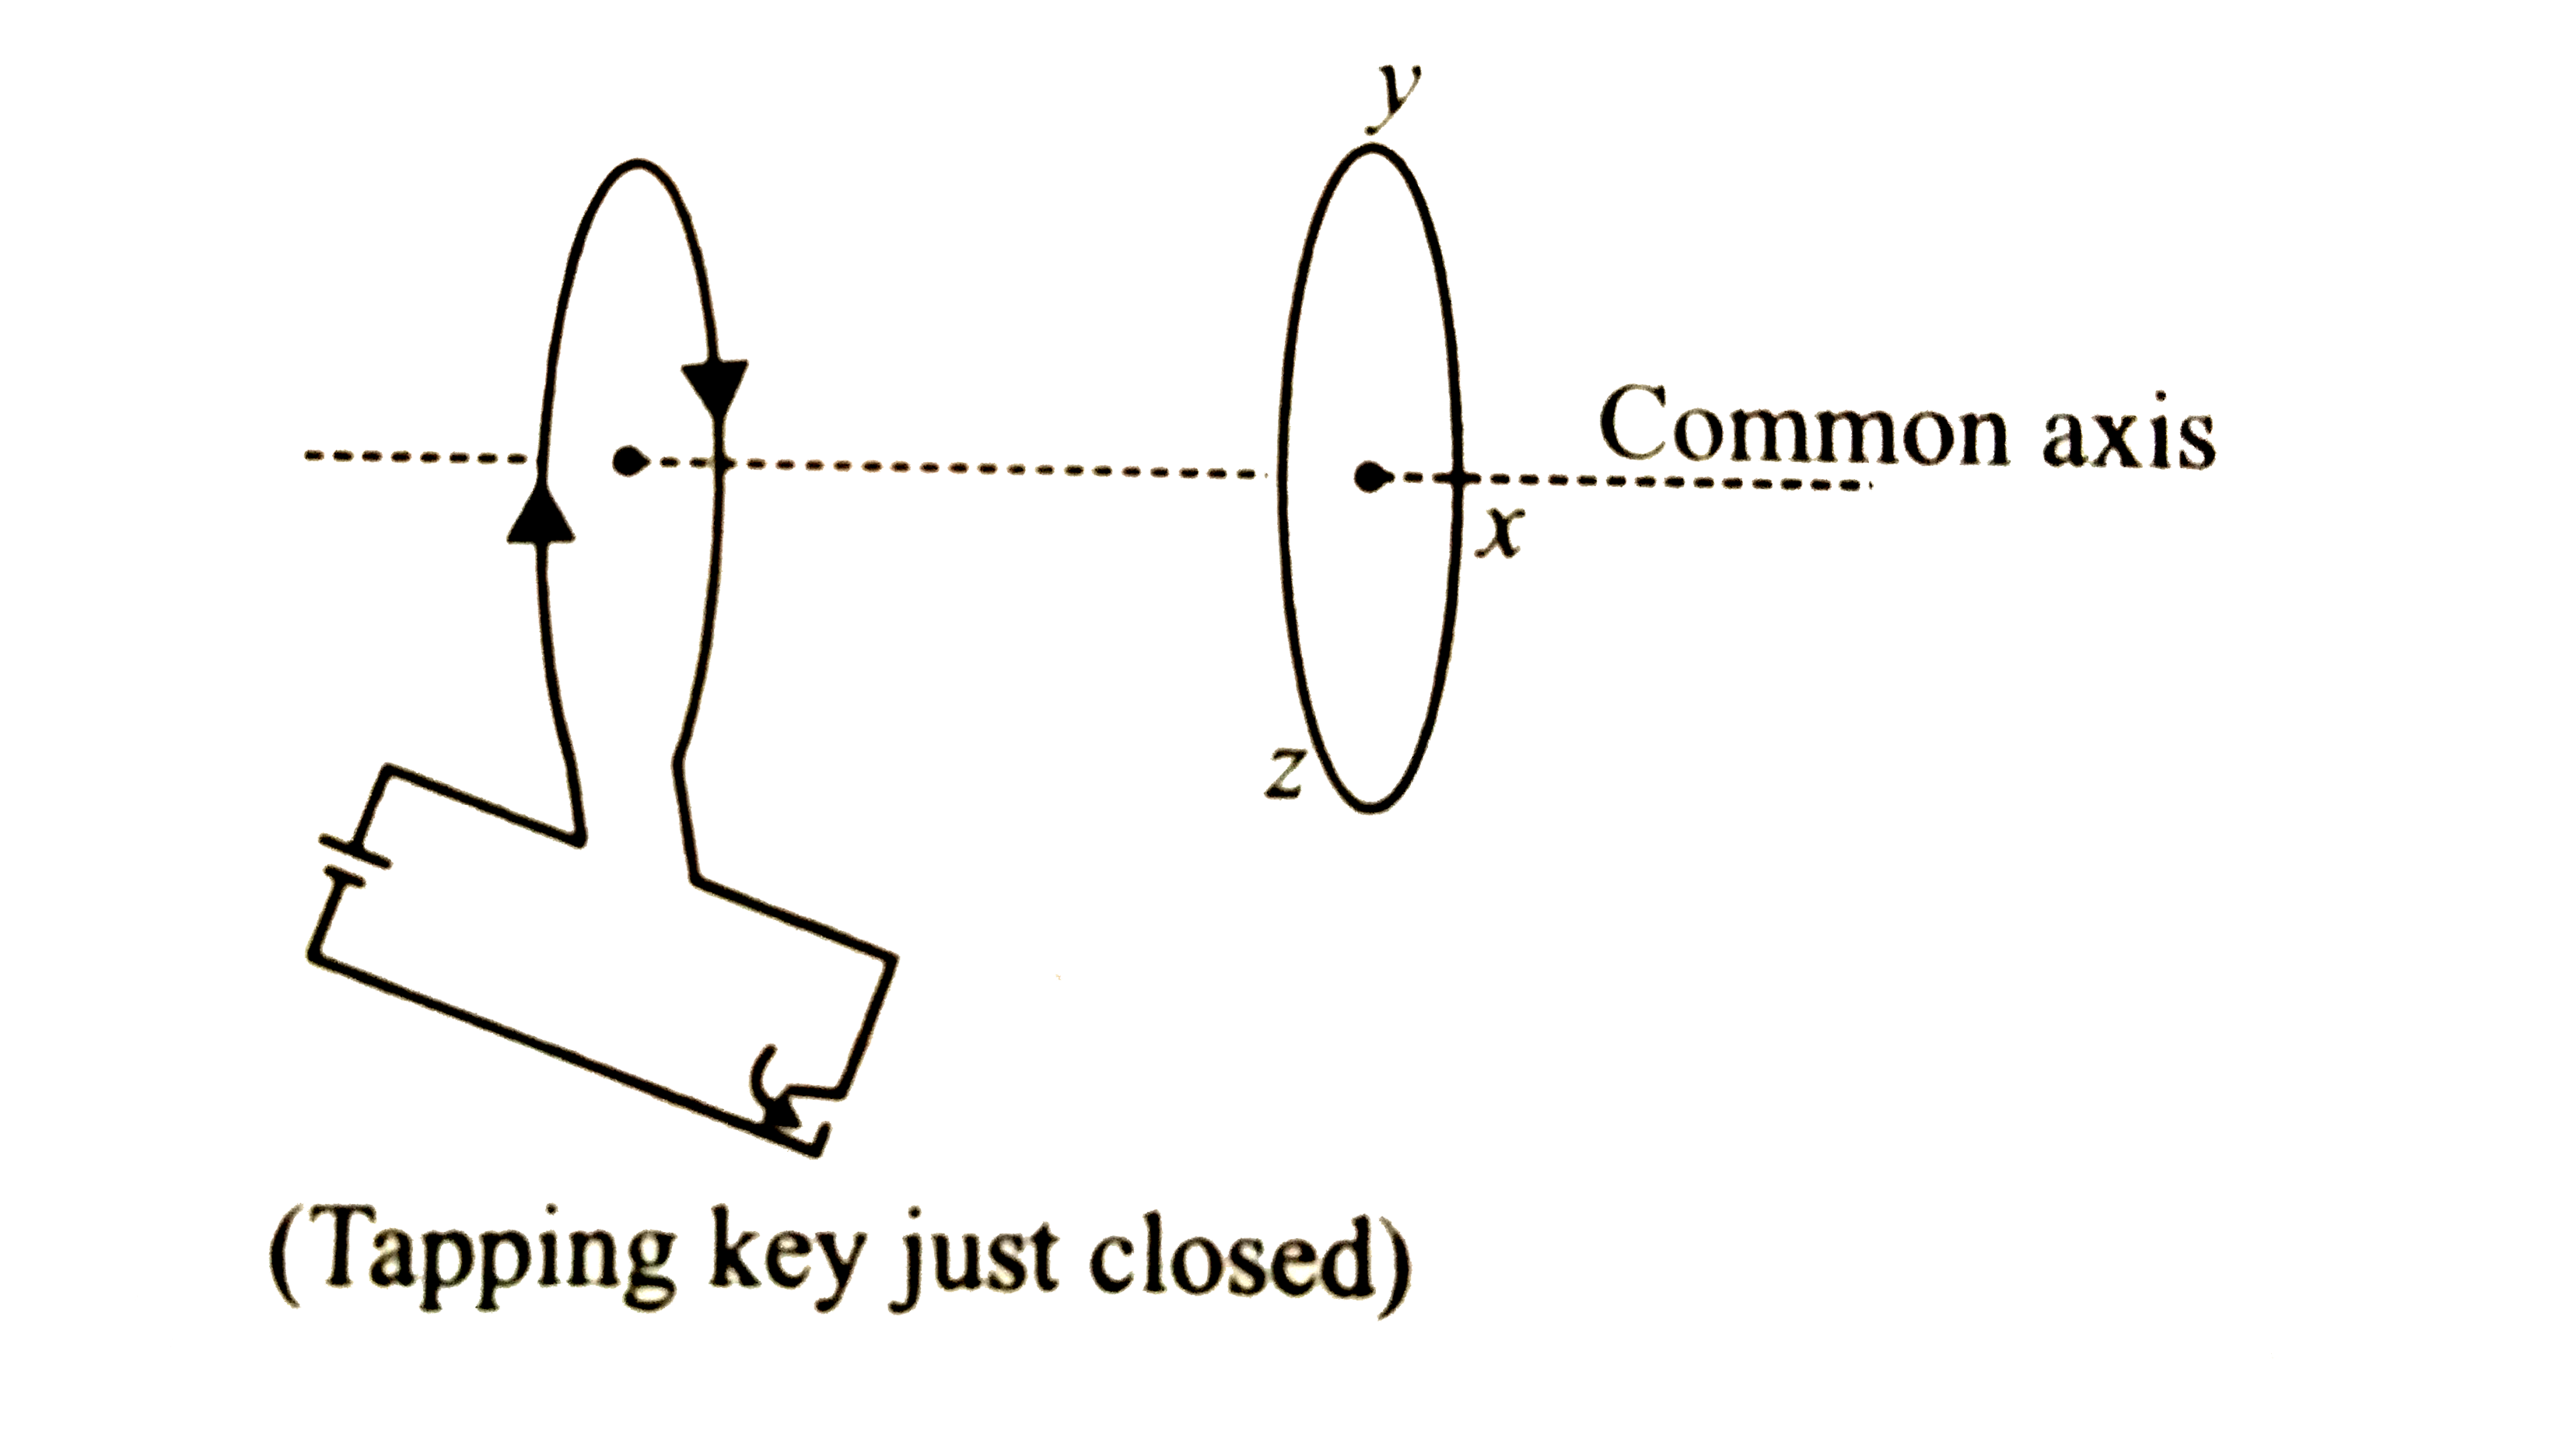 The direction of induced current in the right loop in the situation shown by the given figure is